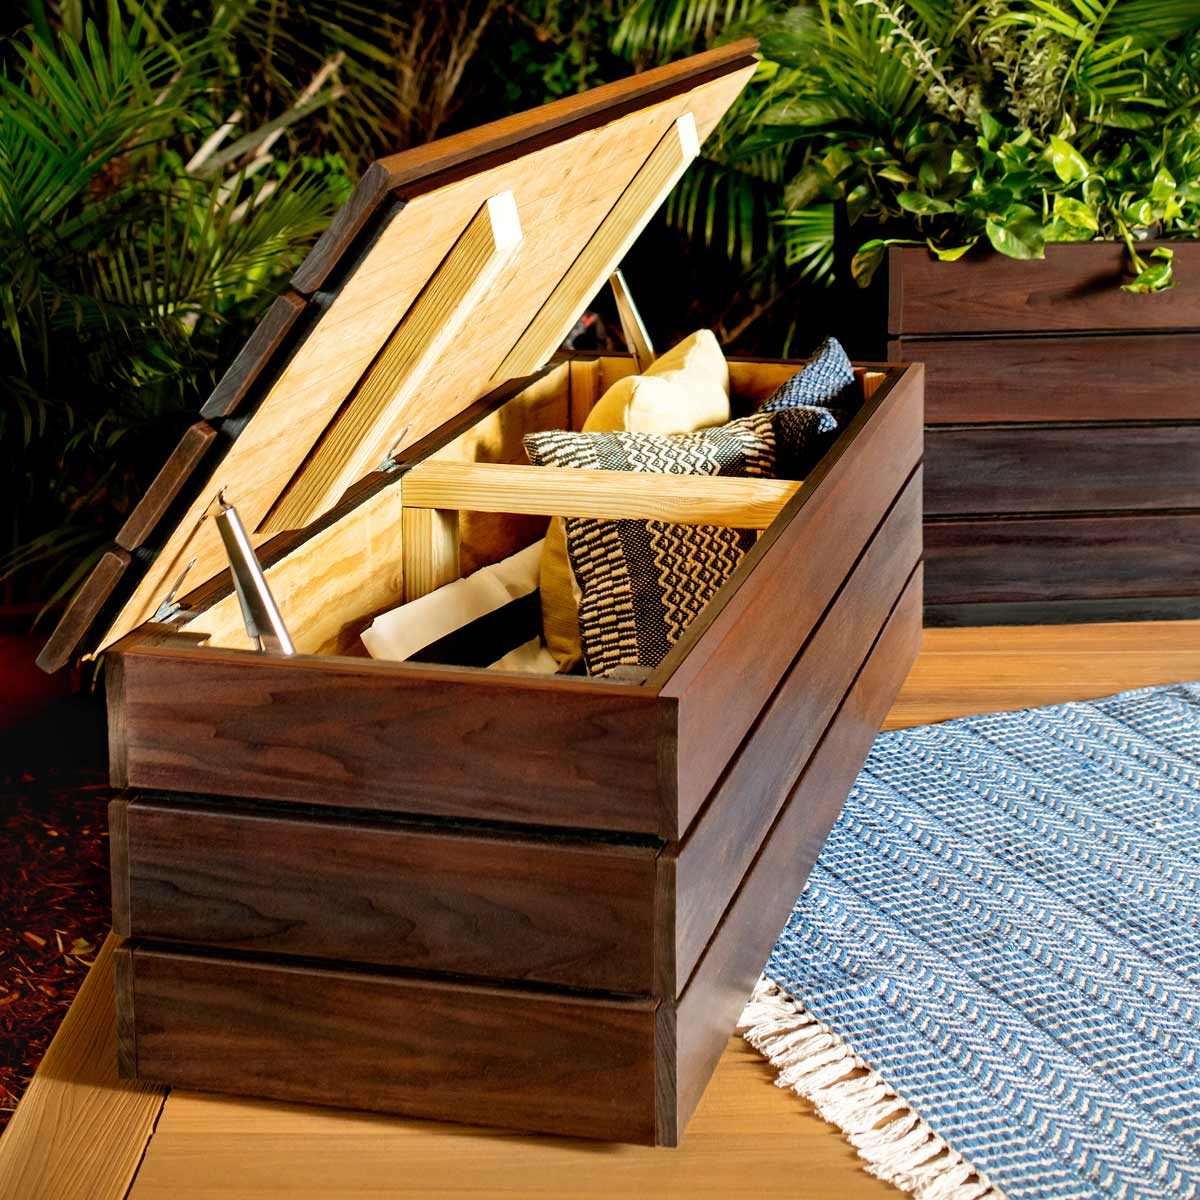 How to Build an Outdoor Storage Bench (DIY)